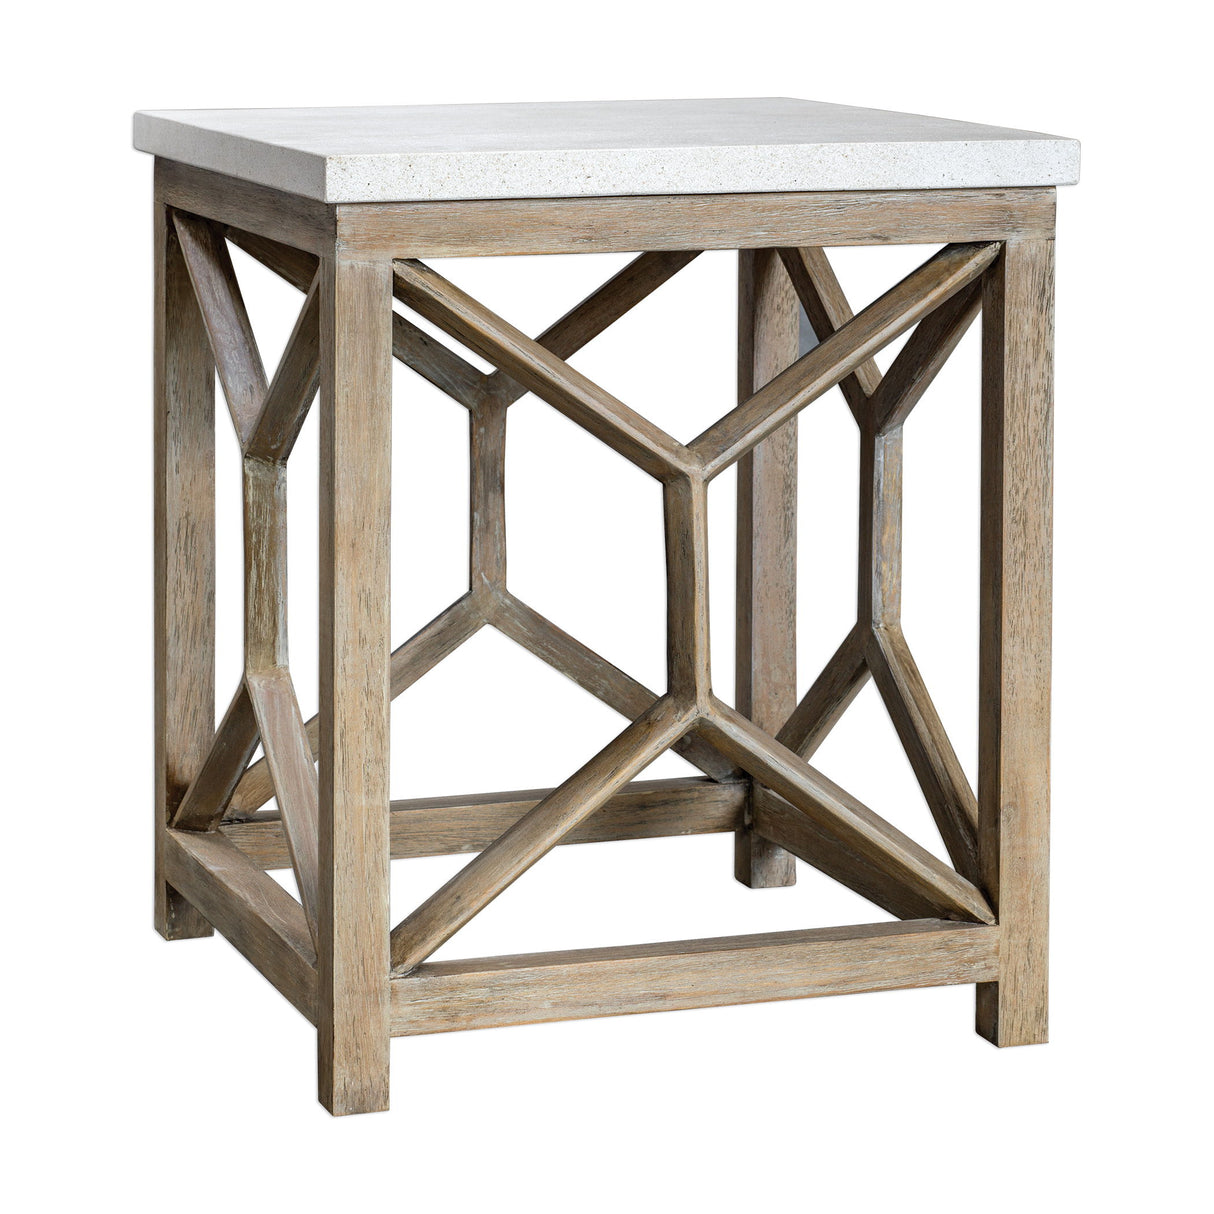 Catali - Stone End Table - White & Light Brown